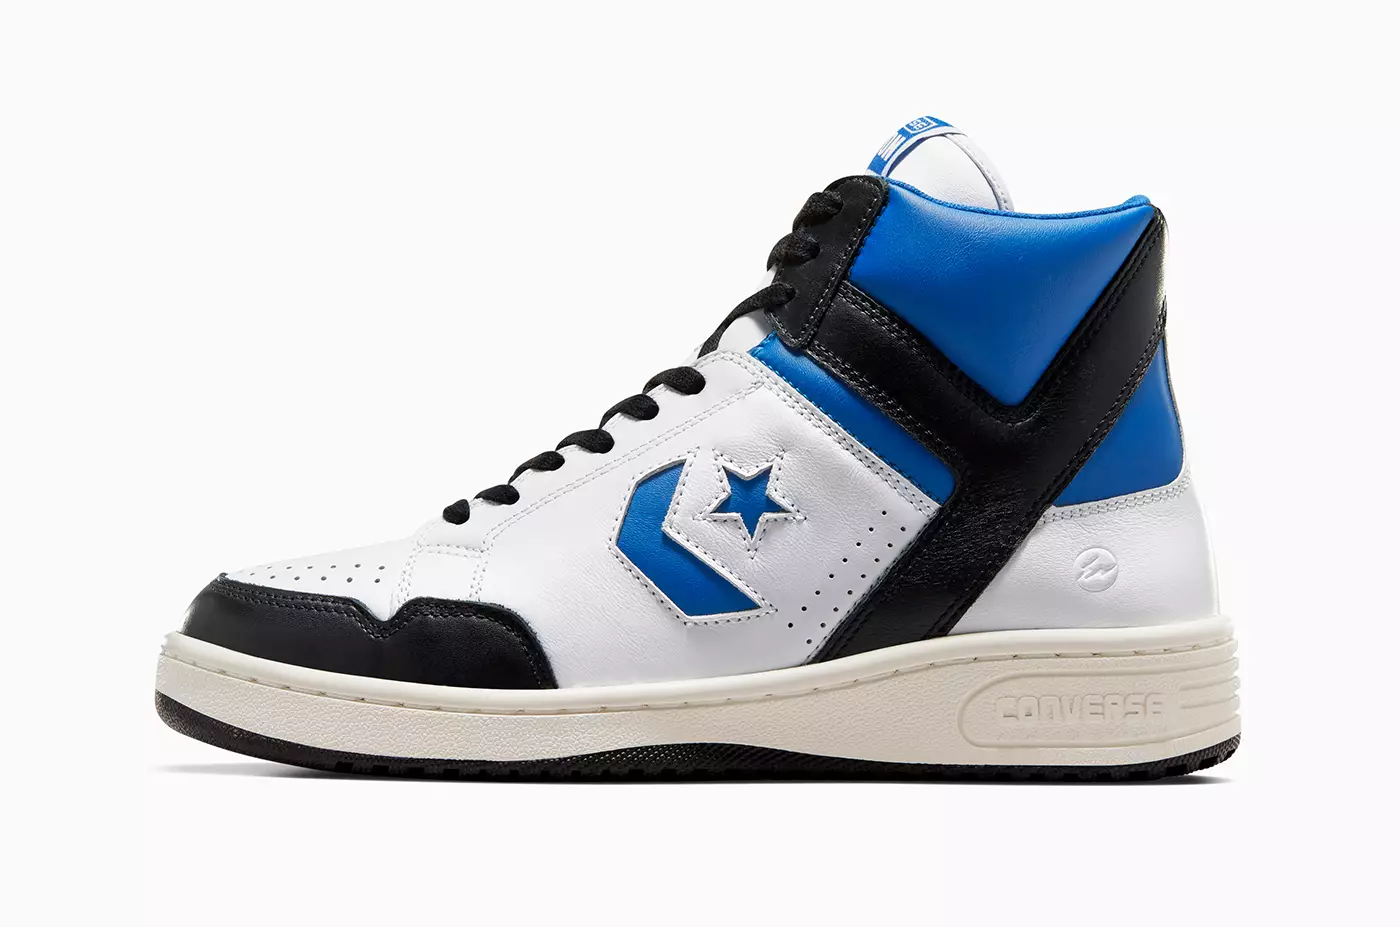 Converse Weapon x Fragment